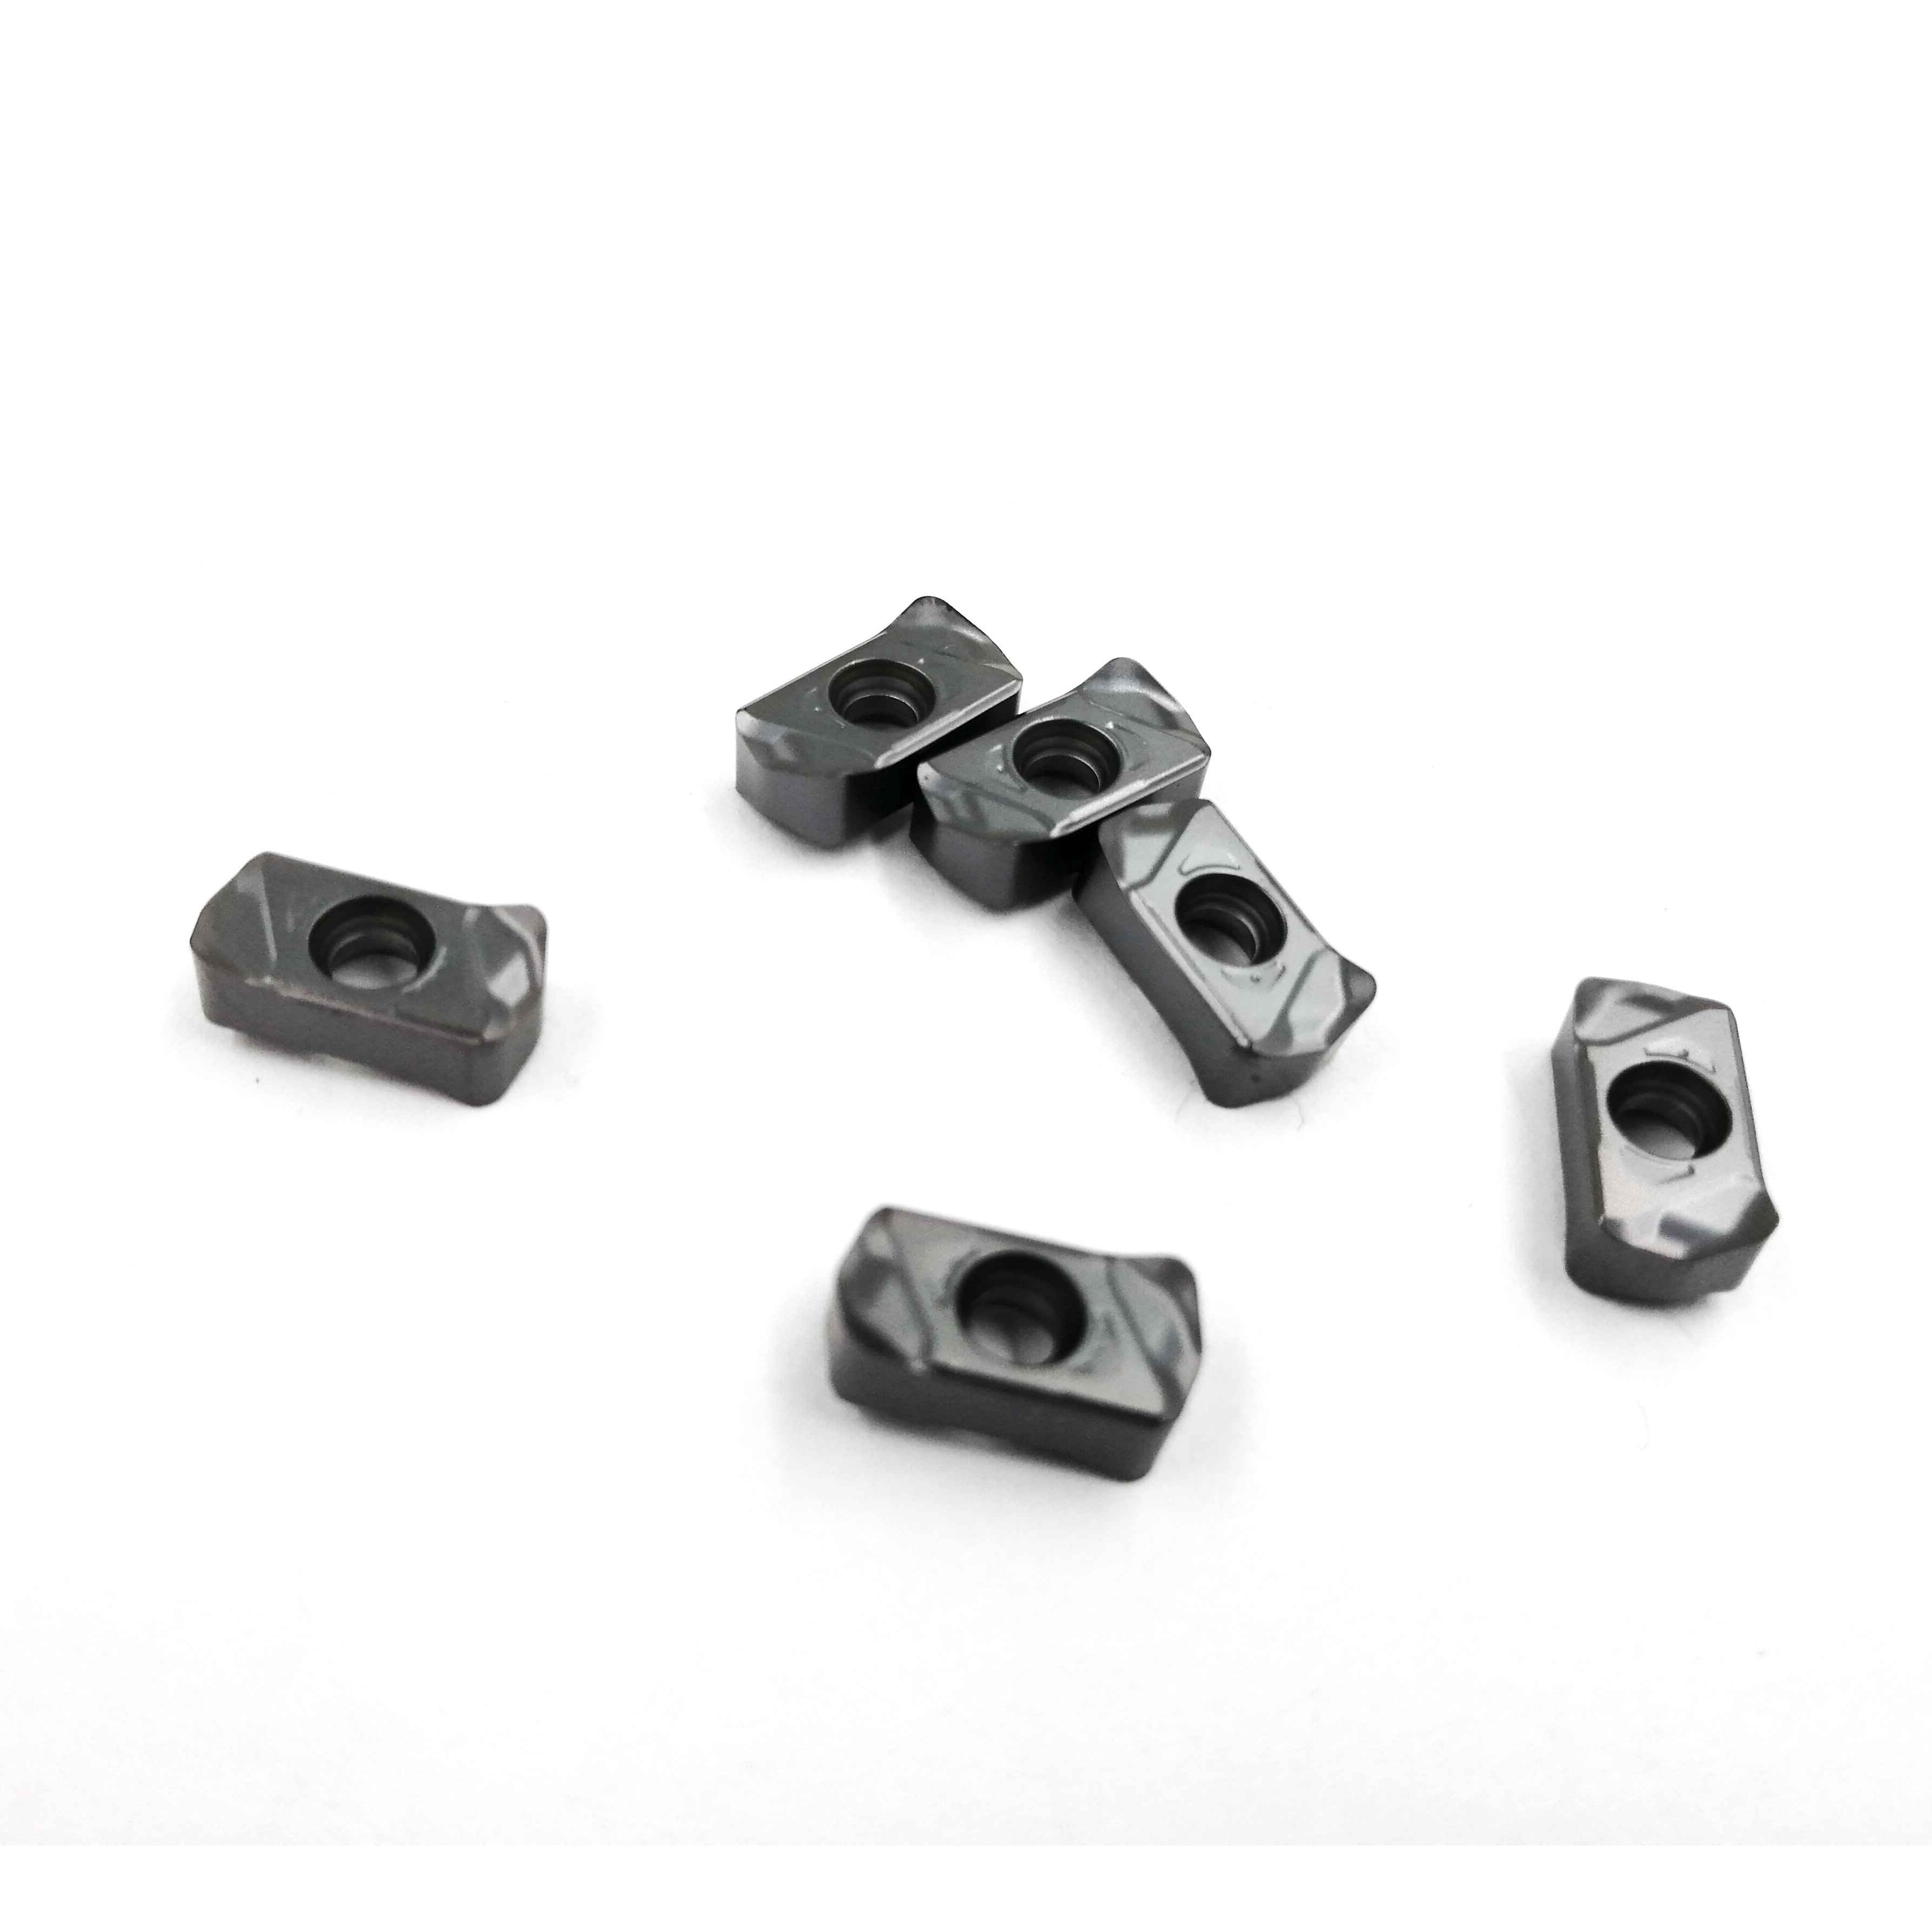 LNMU0303 High Feed Carbide Insert For Milling Cutter